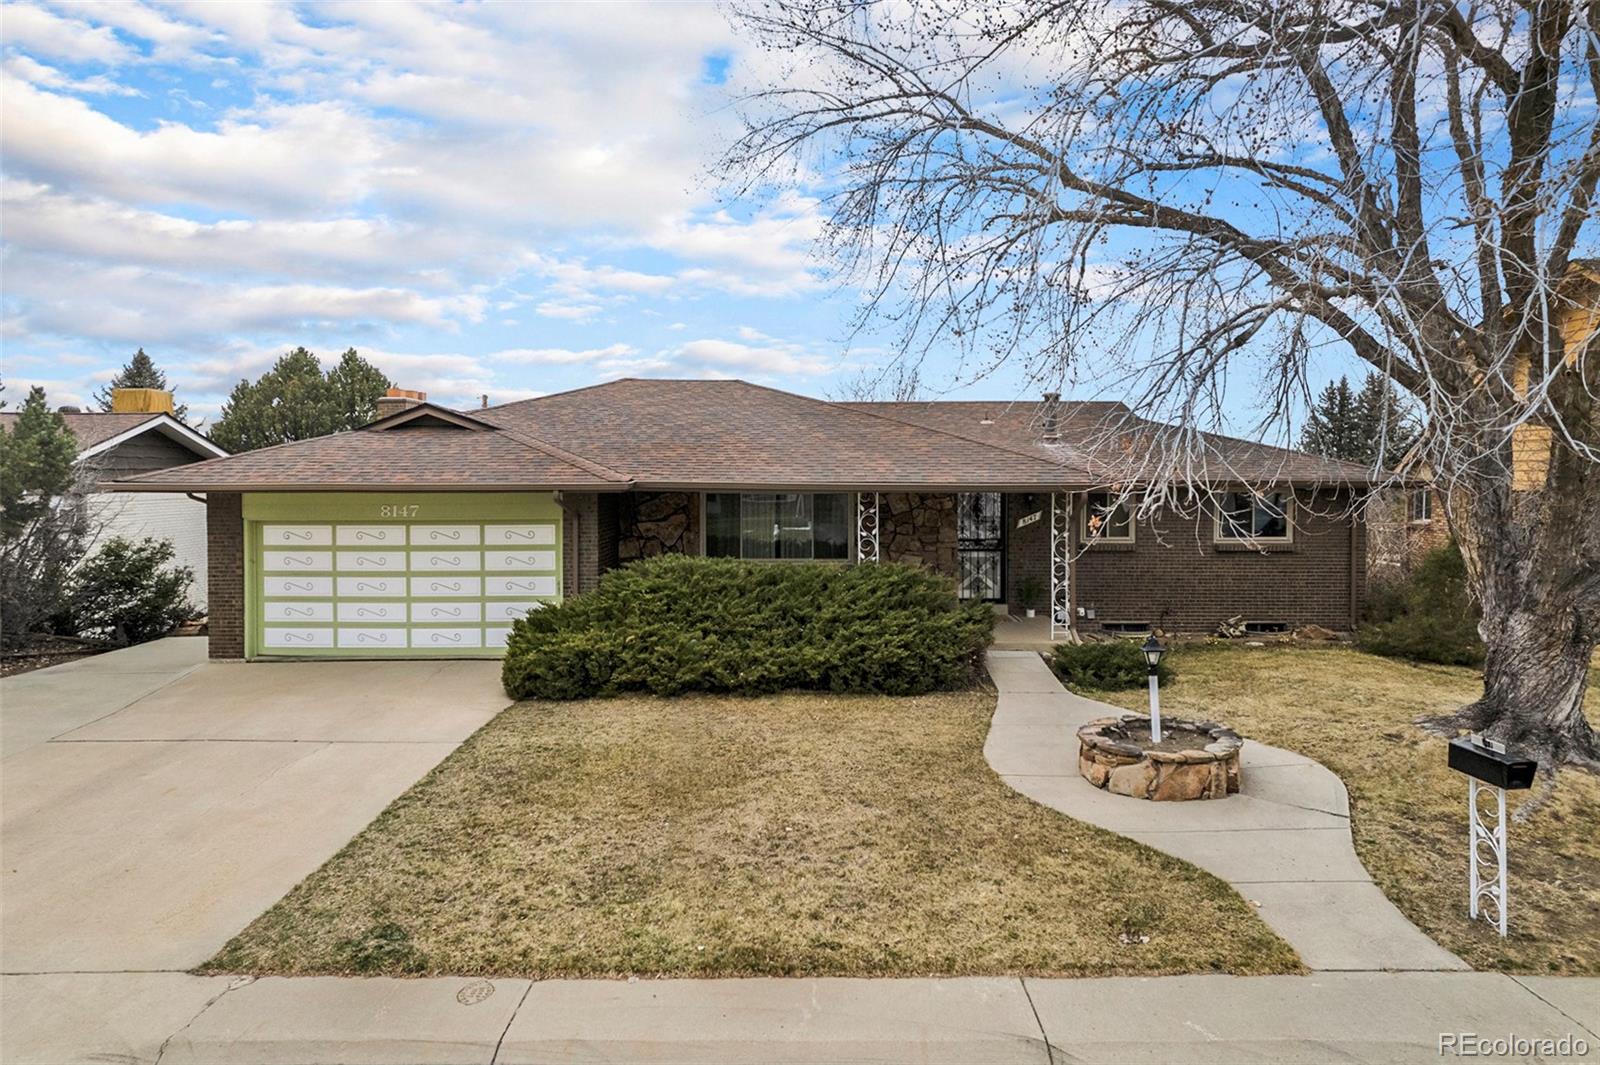 8147 W 71st Place, arvada MLS: 8983257 Beds: 4 Baths: 3 Price: $675,000